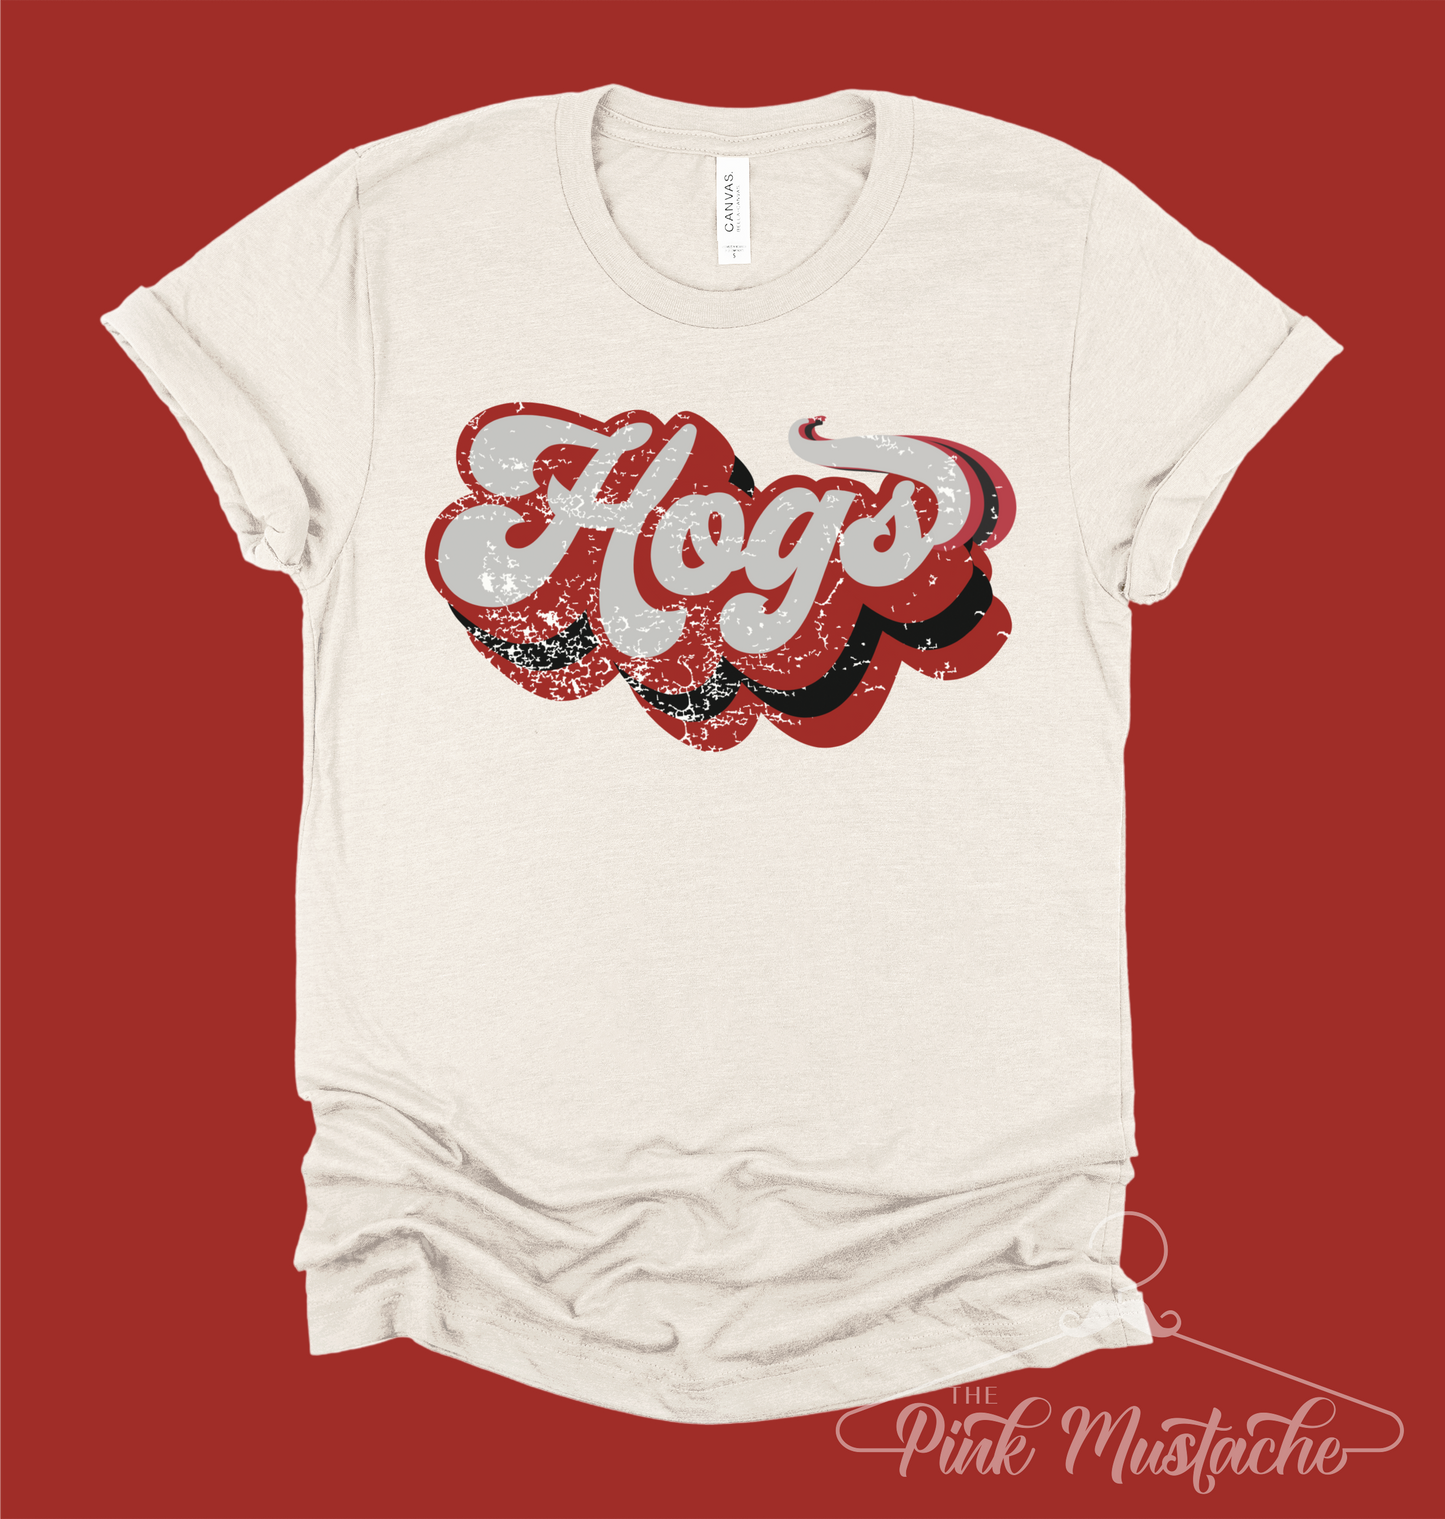 Soft Style Hogs - Crawford Fundraiser - Tee/ Toddler, Youth, and Adult Sizes Available